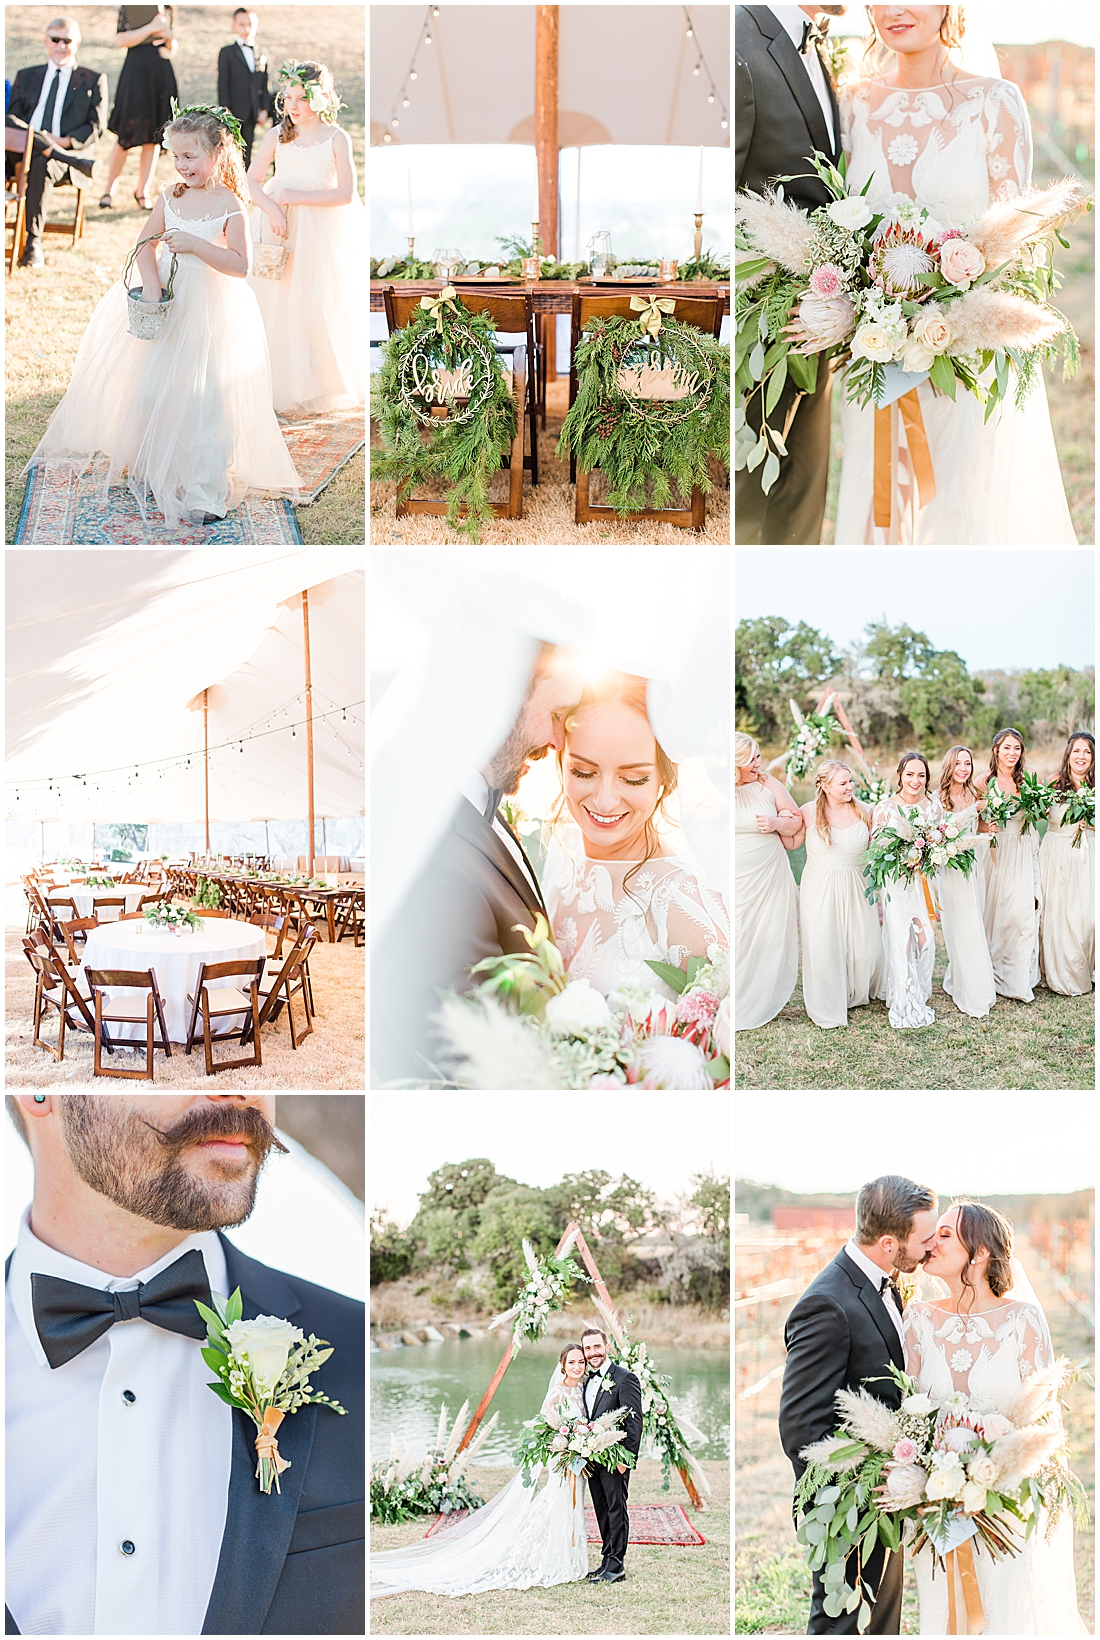 champagne and greenery winter wedding, champagne and greenery wedding ideas, winter wedding ideas, The De Siene - Marrakesh Melody dress, pampas grass wedding flowers, pampas grass bouquet, pampas grass wedding ideas, winter wedding inspiration, winter wedding colors, wedding color ideas, classic elegant wedding ideas, uique wedding ideas, champagne bridesmaid dresses, flower girl, bridal photos, bride and groom photos, turtle creek olive grove in kerrville texas, texas hill country wedding